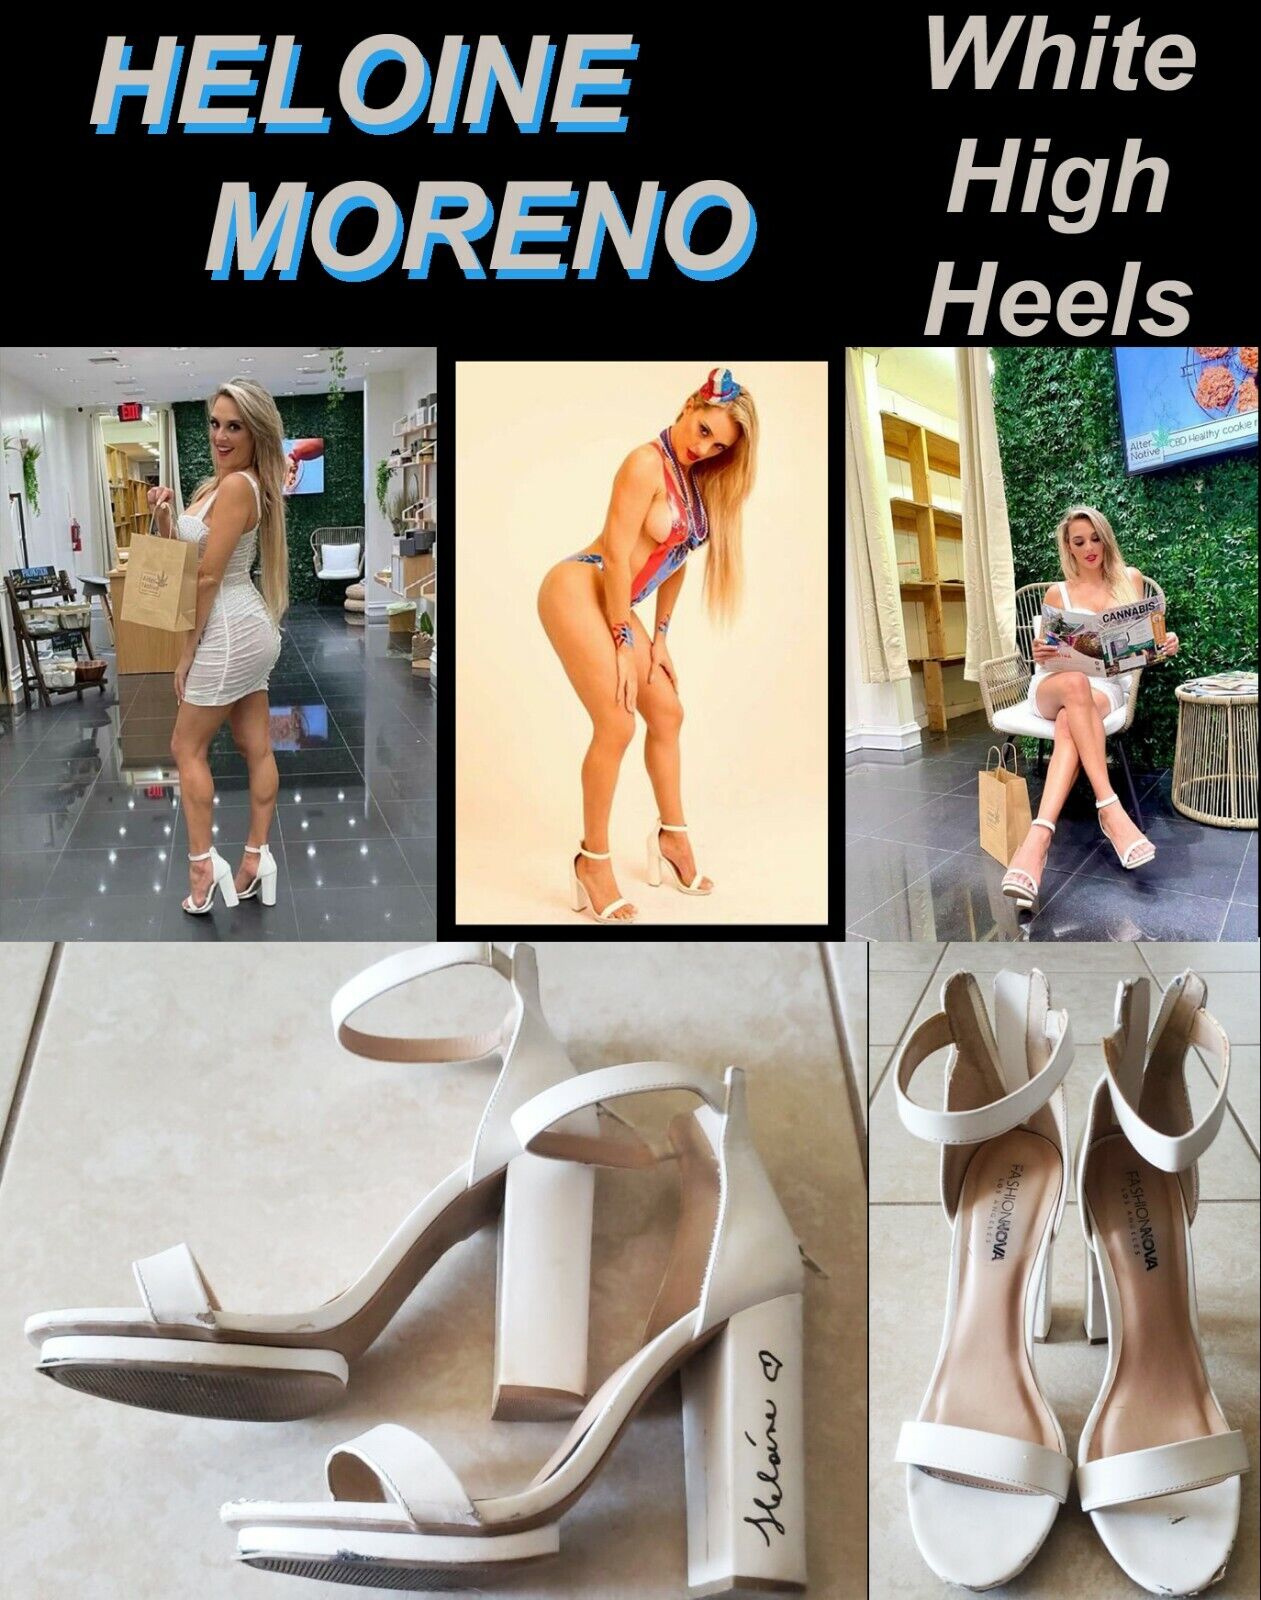 Sensational Sexy Playboy Supermodel Heloine Moreno Signed/owned/worn High Heels